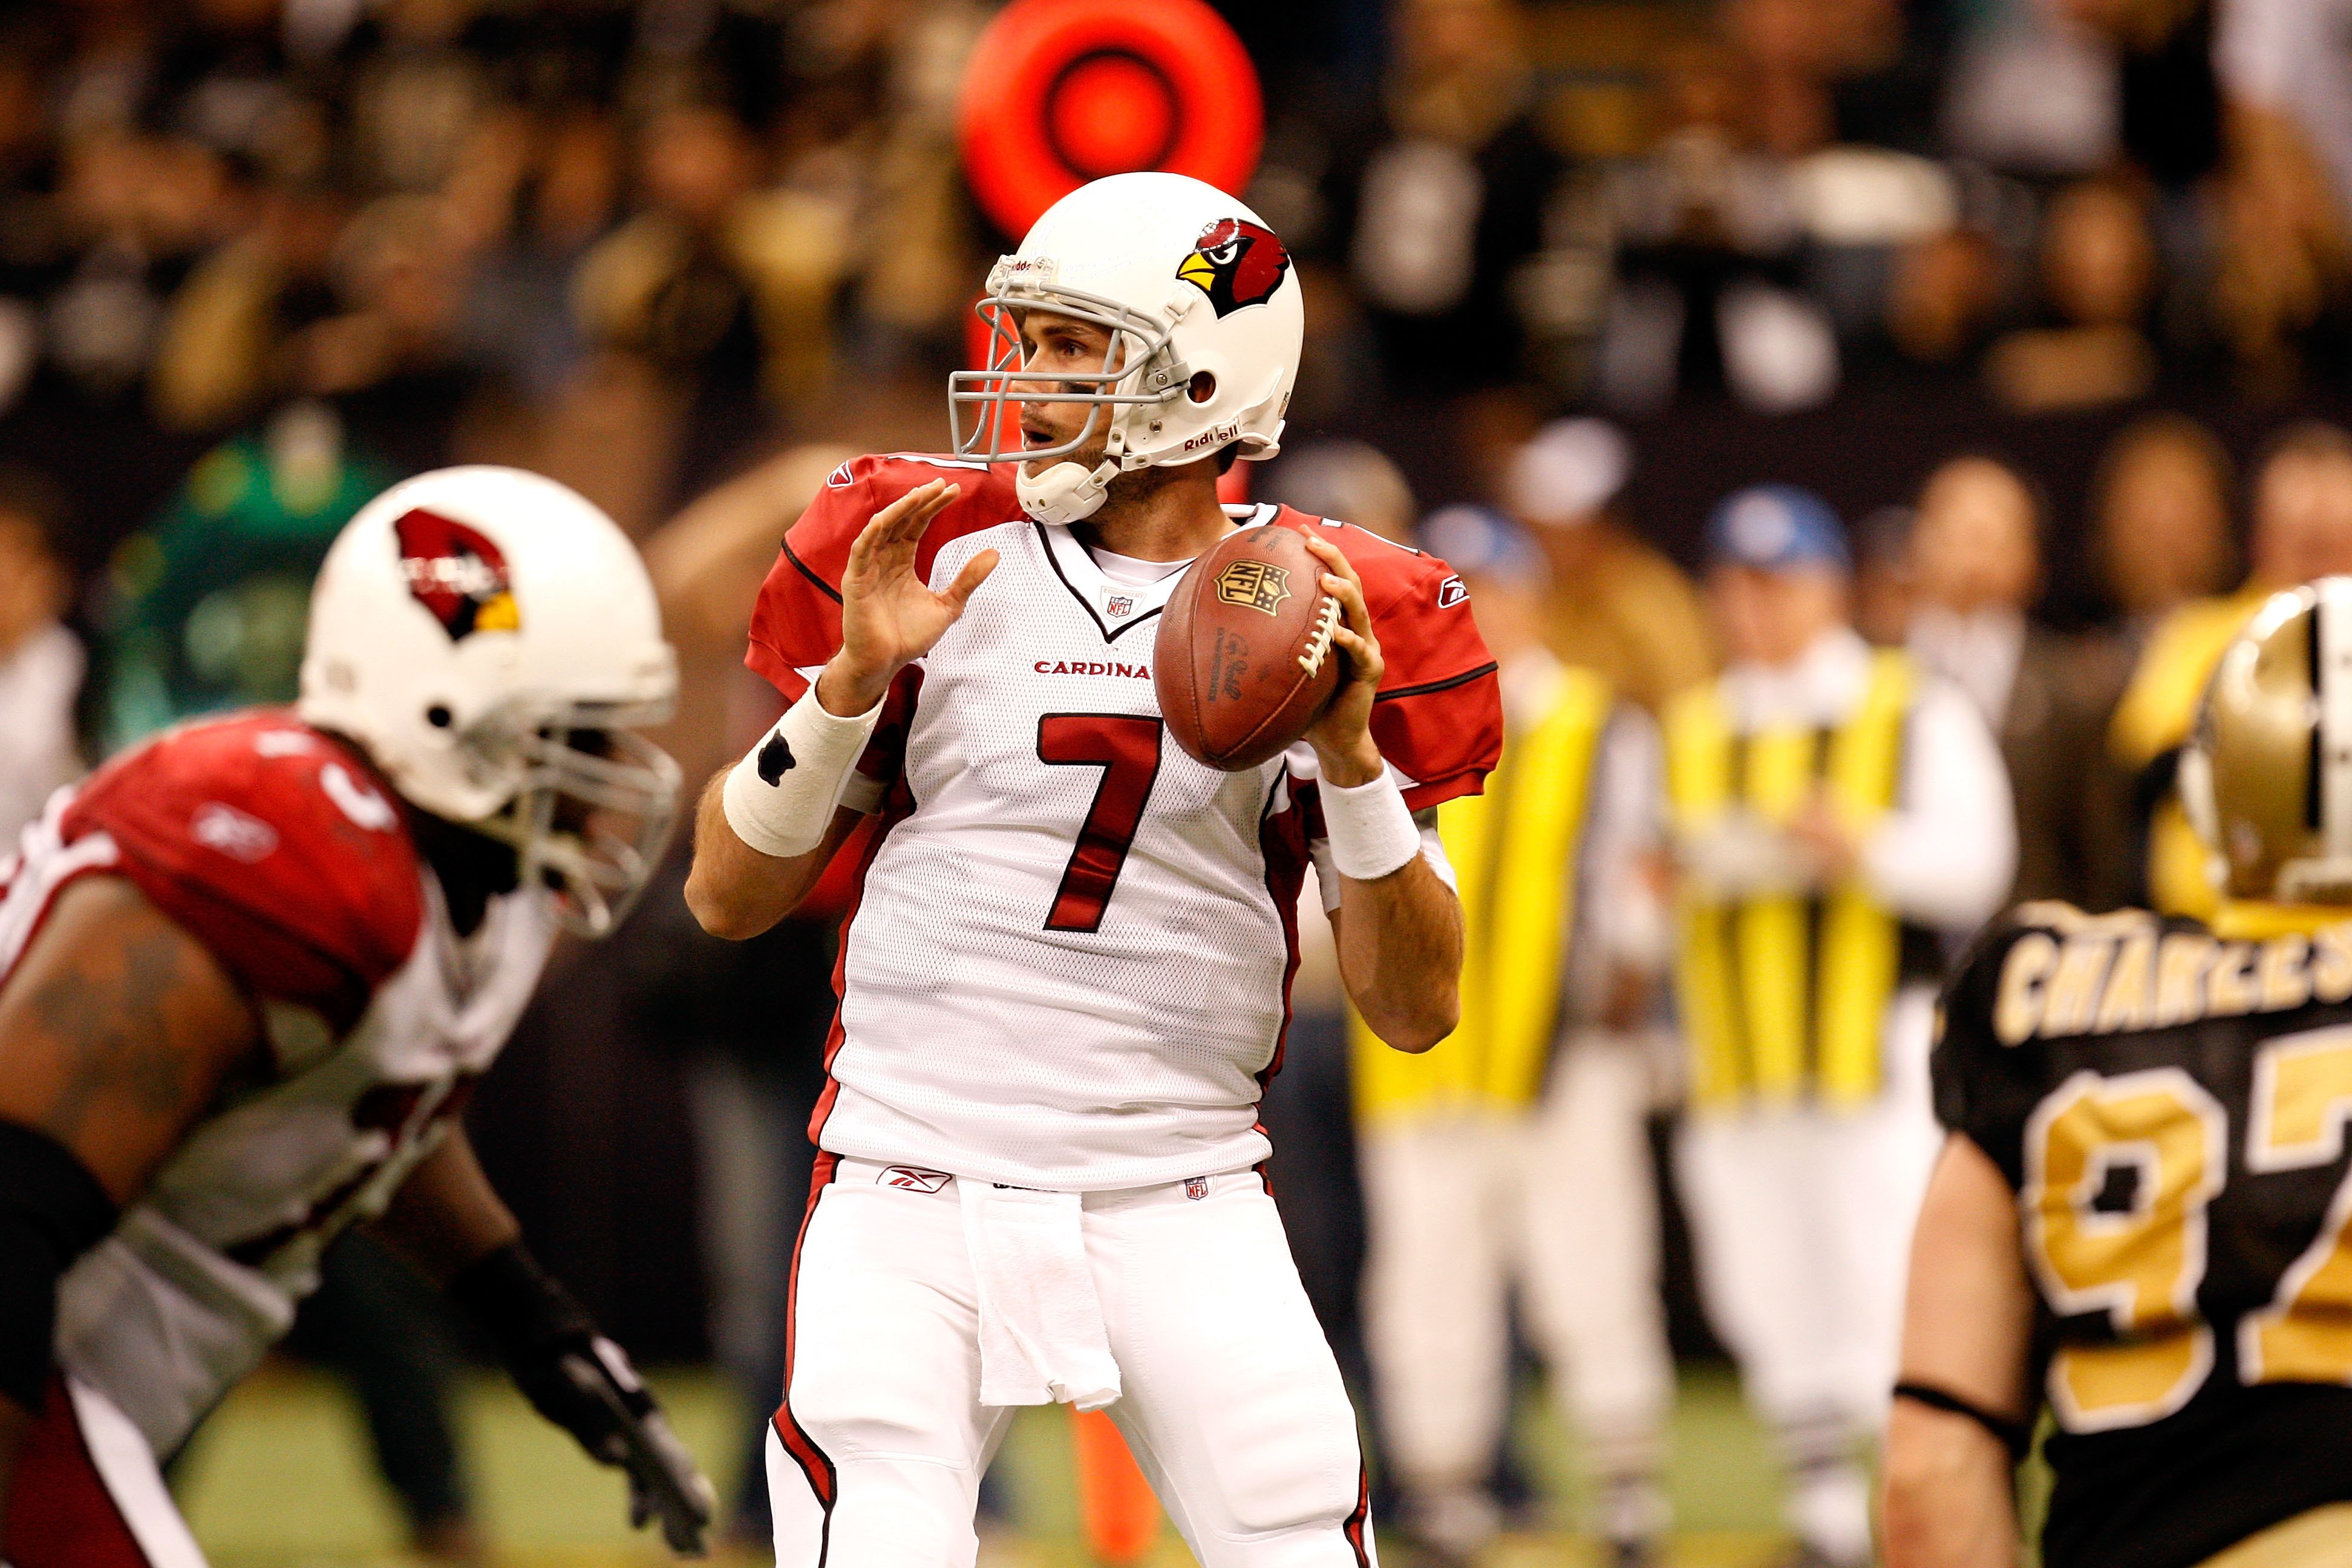 NEW ORLEANS - JANUARY 16:  Quarterback Matt Leinart #7 of the Arizona Cardinals throws a pass against the New Orleans Saints during the NFC Divisional Playoff Game at Louisana Superdome on January 16, 2010 in New Orleans, Louisiana. The Saints won 45-14.